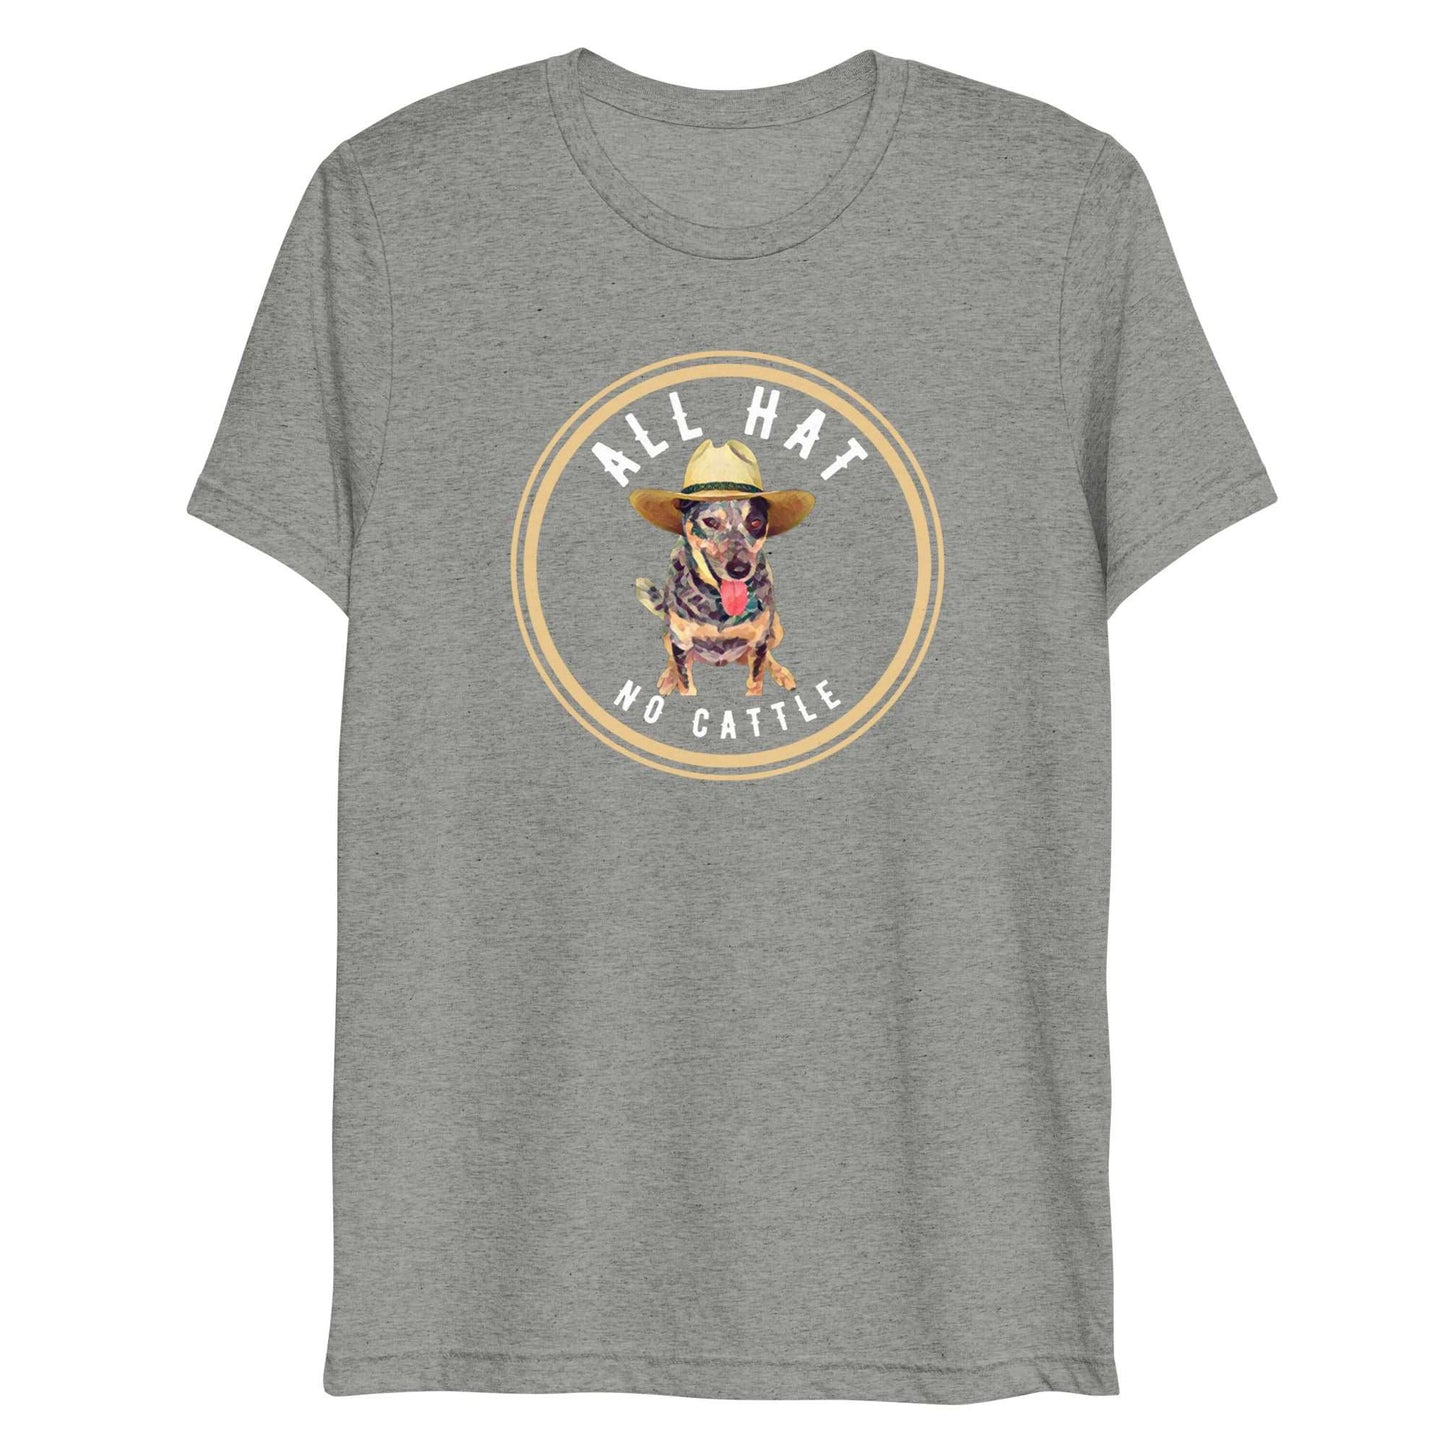 All Hat No Cattle t-shirt